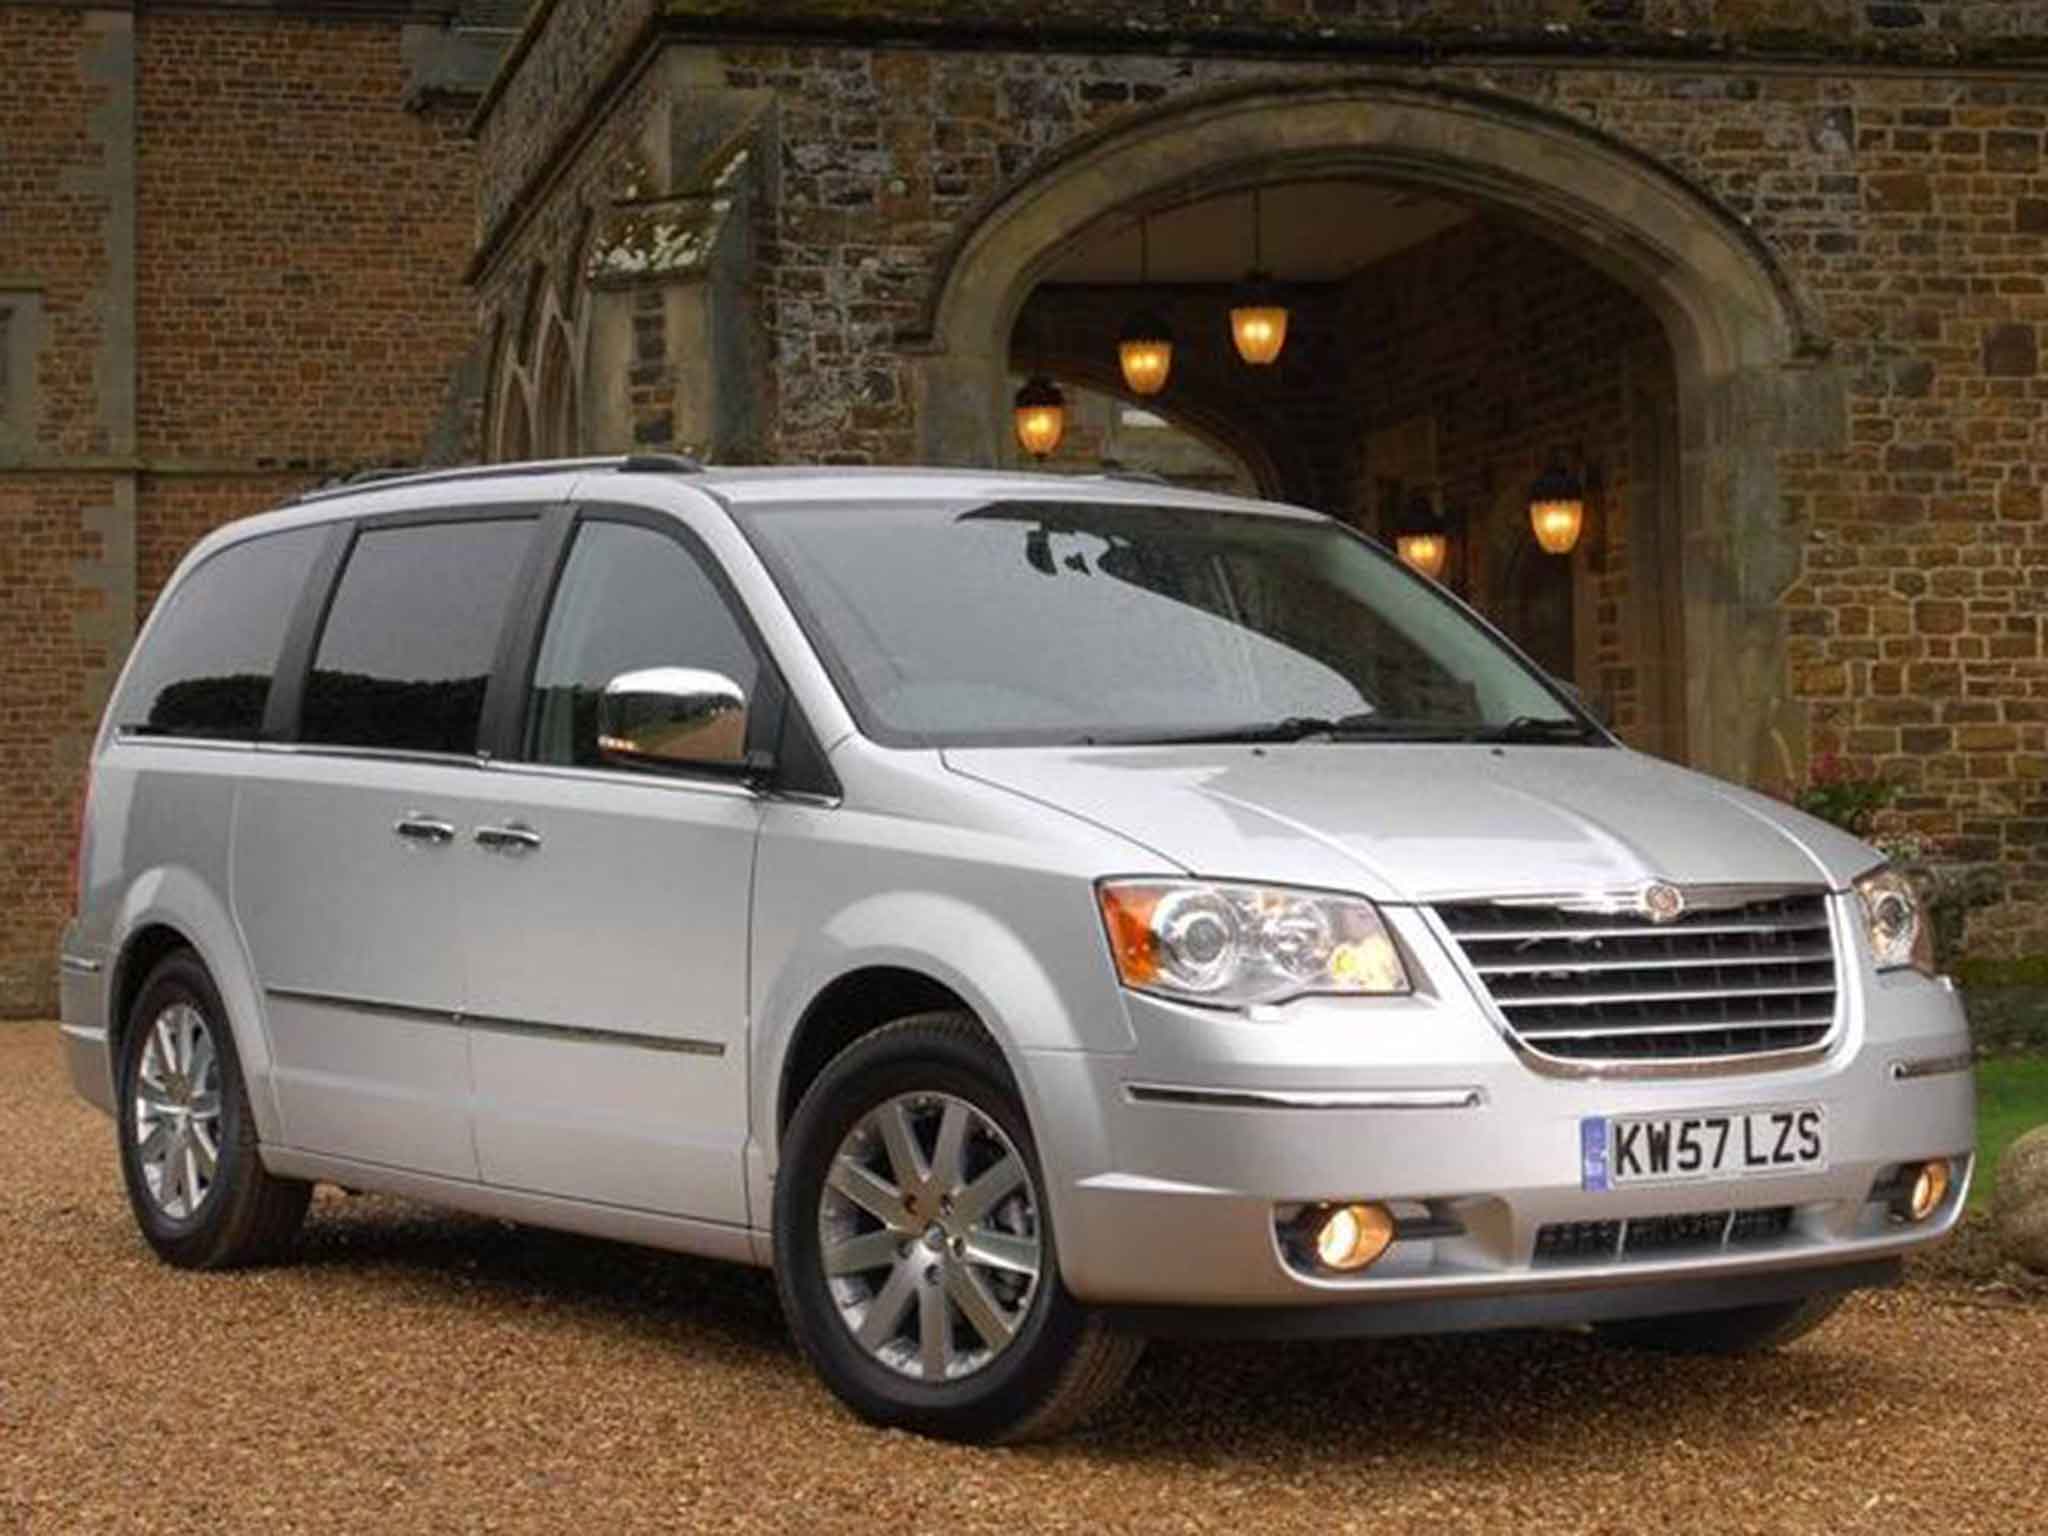 The Grand Voyager: Underwhelming diesel engine and low-quality materials